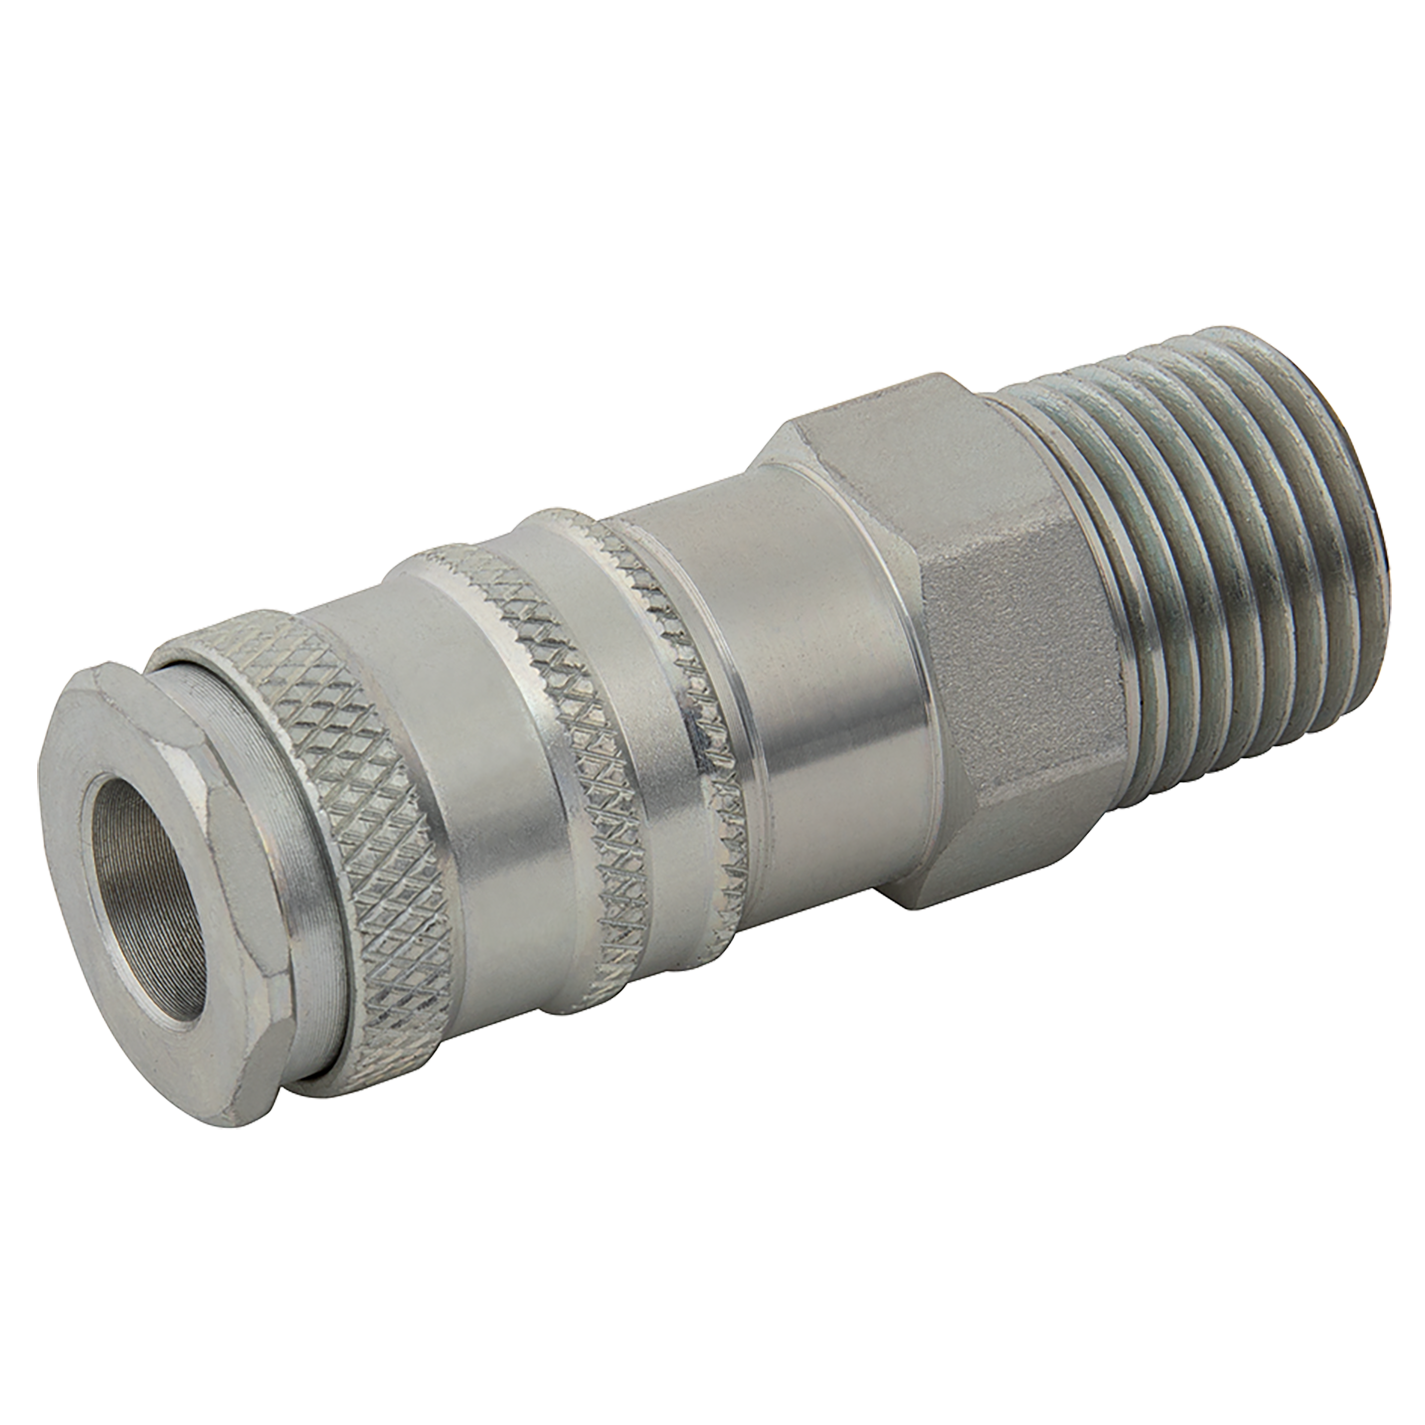 BE-23 ISO COUPLING 1/4 BSPT MALE